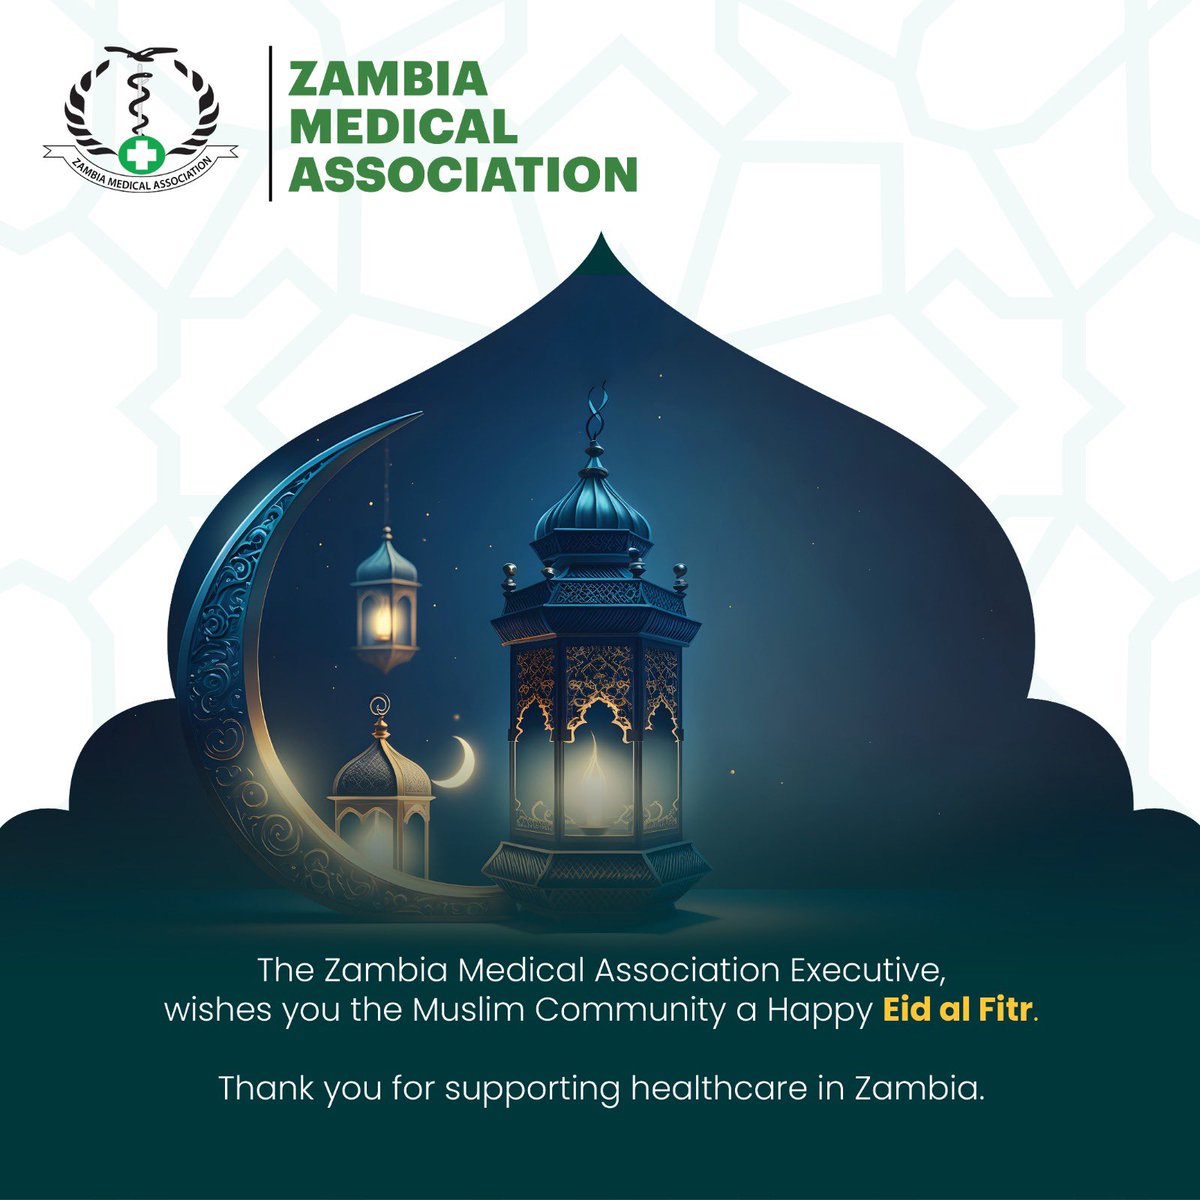 The Zambia Medical Association Executive wishes you the Muslim Community a Happy Eid al Fitr. Thank you supporting healthcare in Zambia.